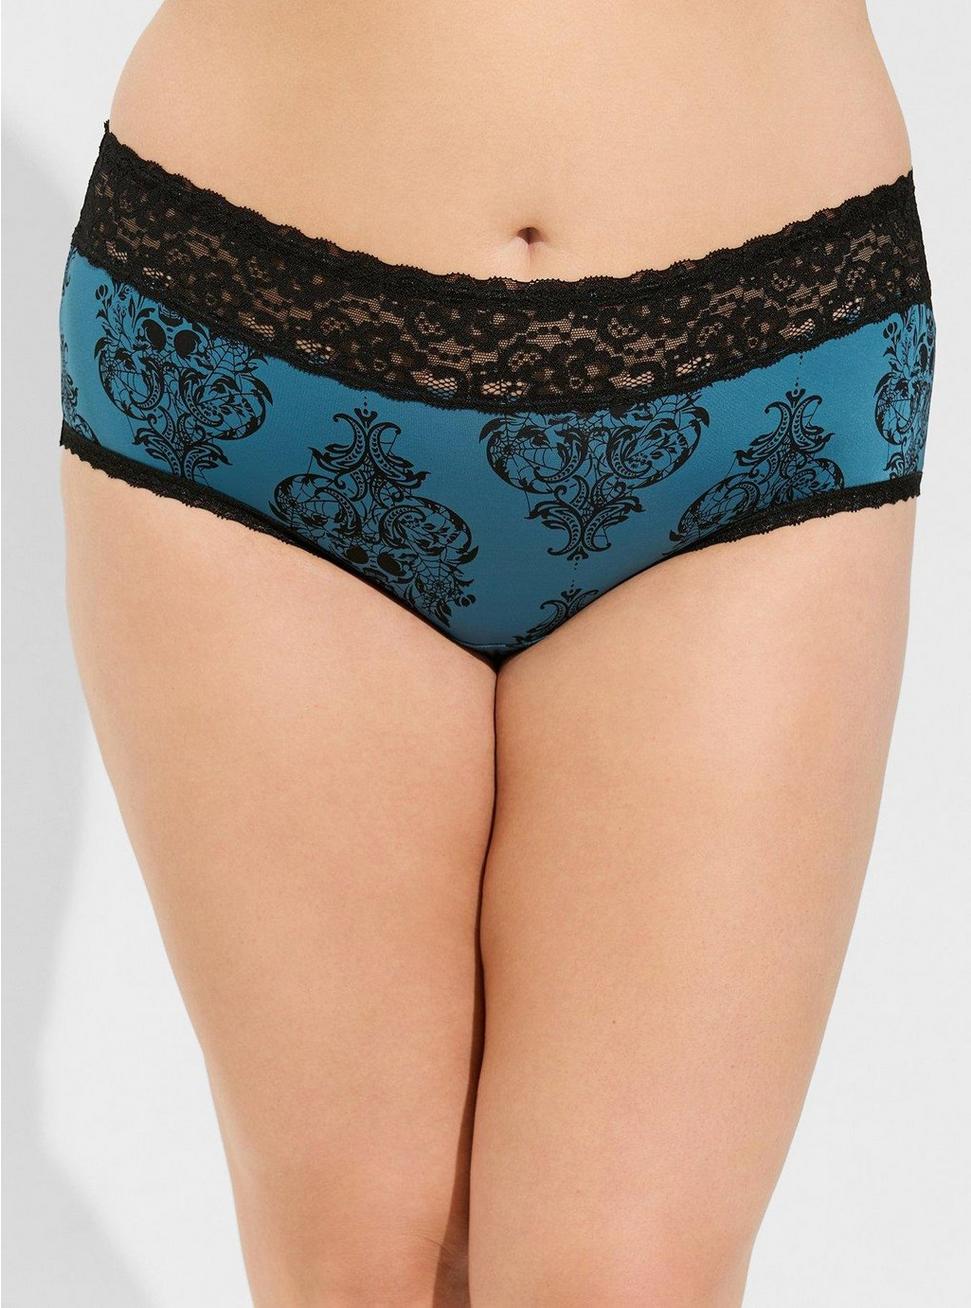 Second Skin Mid-Rise Cheeky Lace Trim Panty, SKULL DAMASK BOUQUET LEGION BLUE, alternate